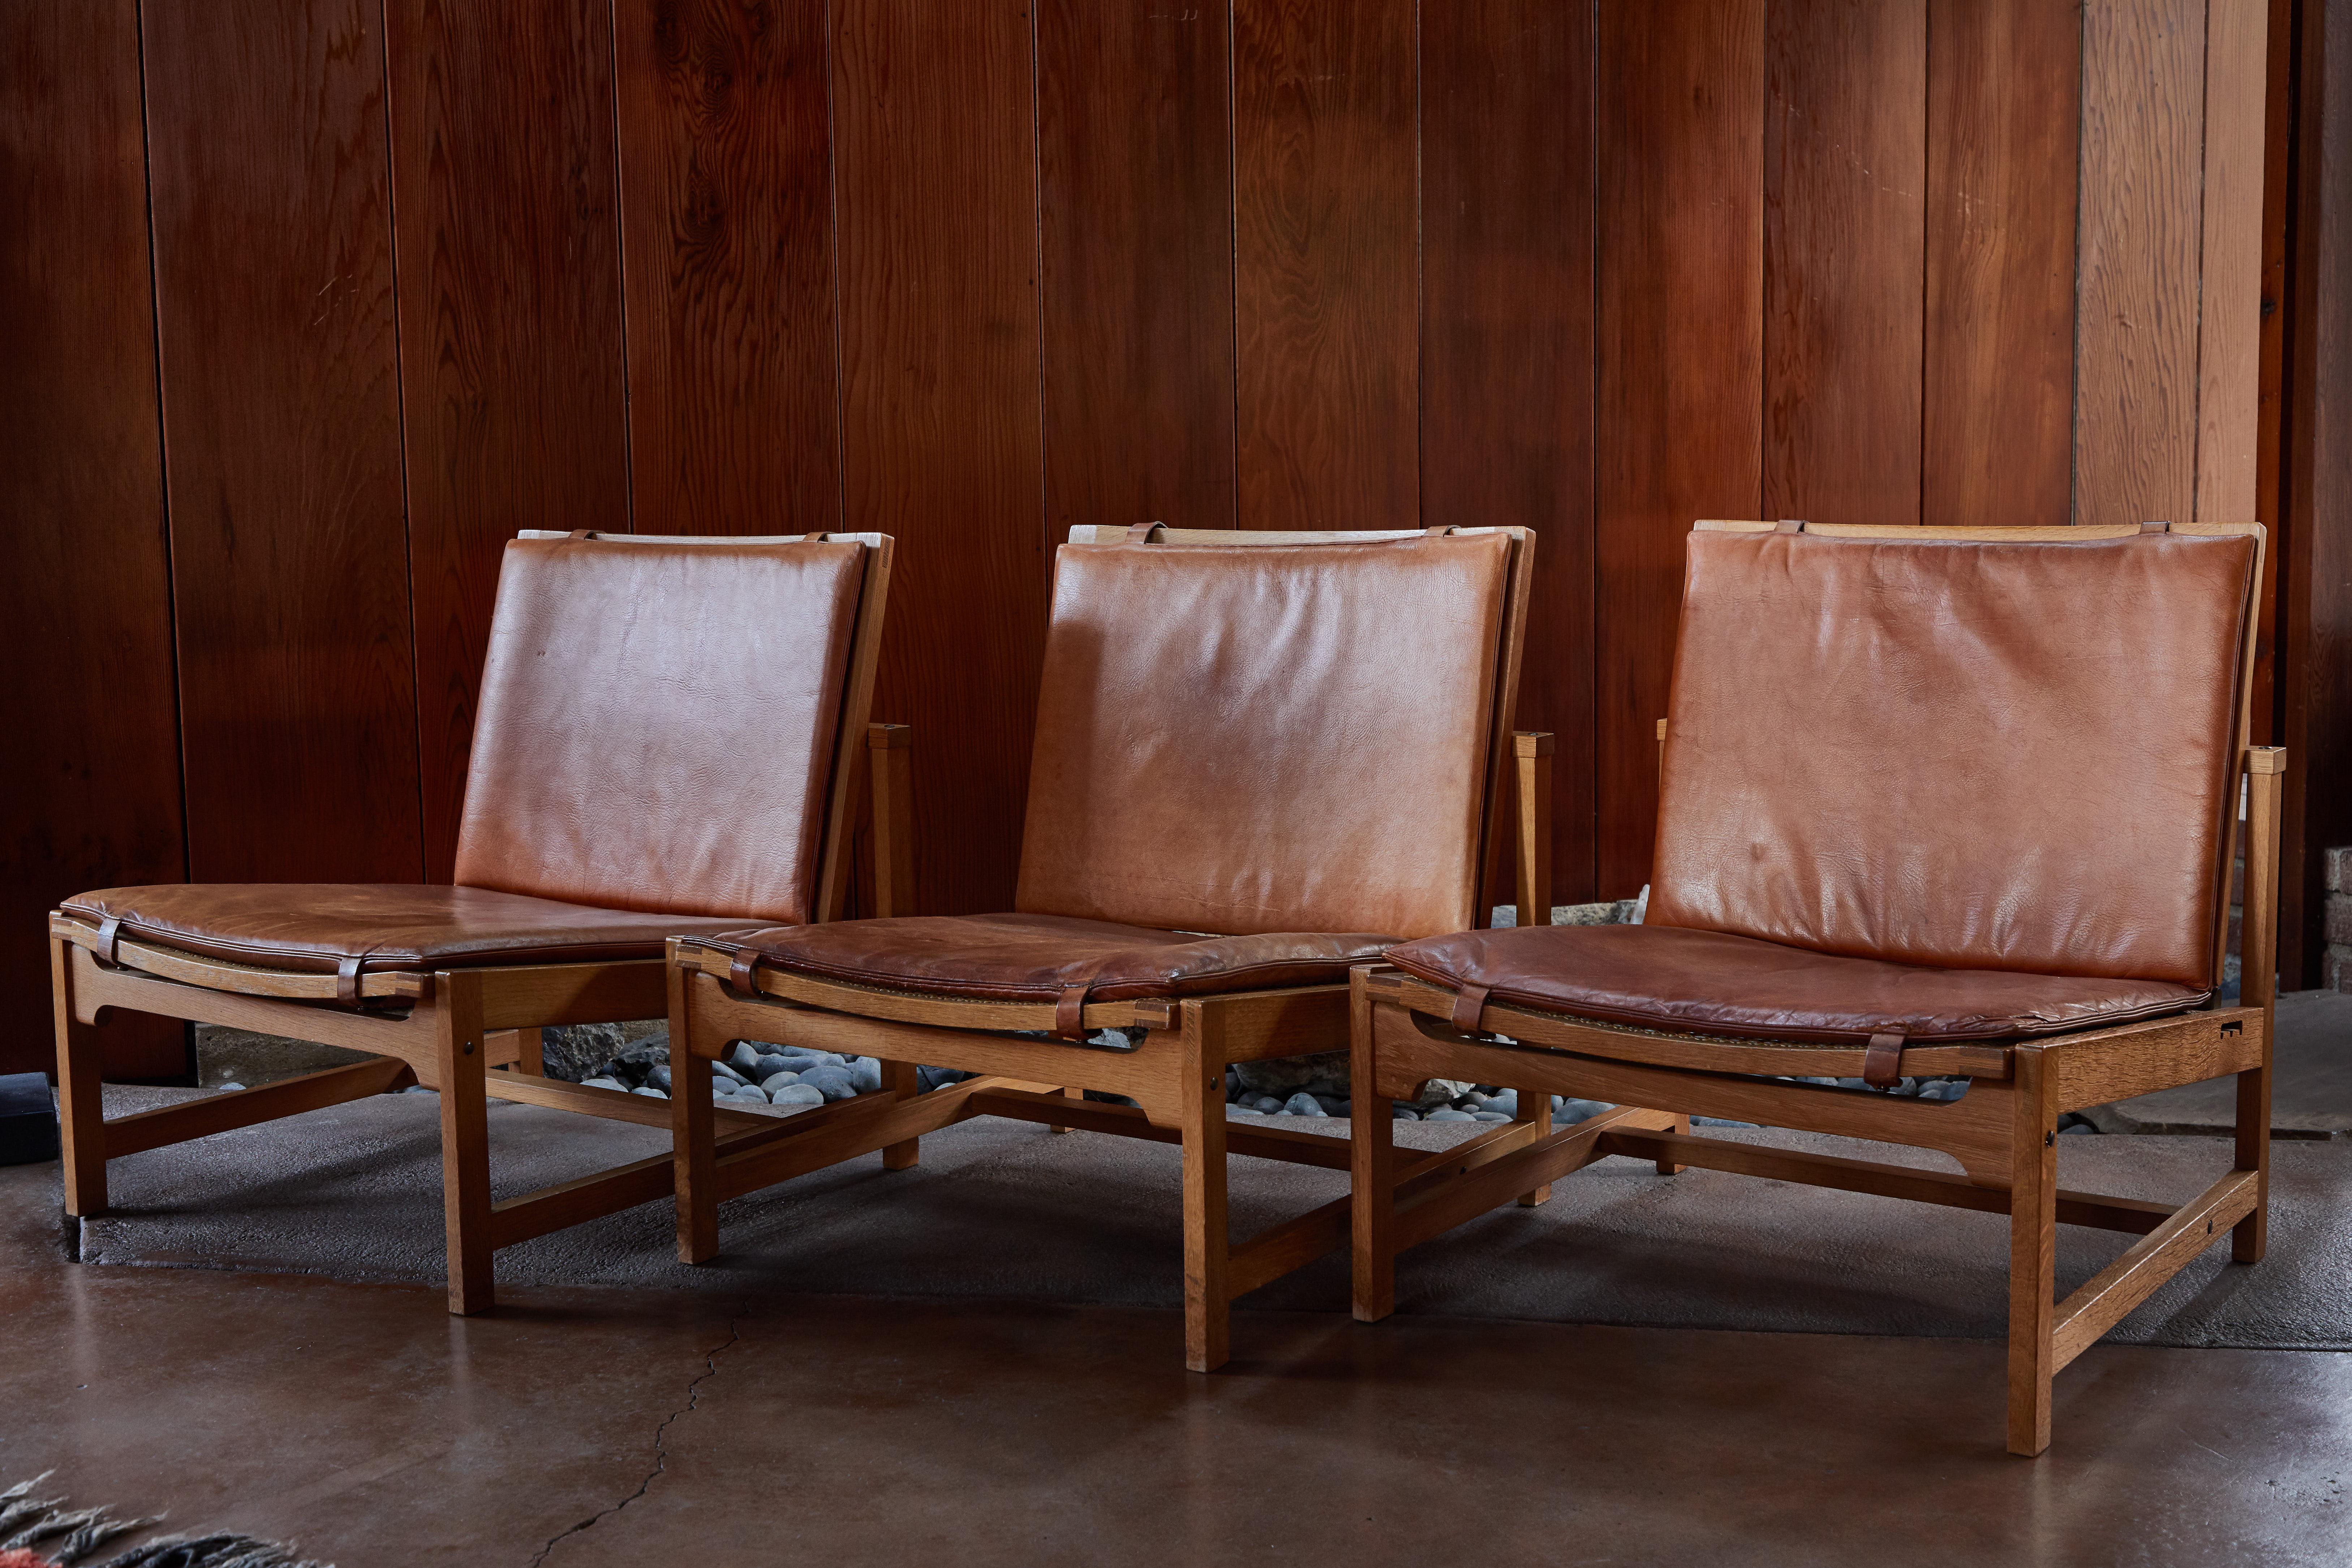 Set of 3 Arne Karlsen & Peter Hjort leather and wicker lounge chairs with ottoman. An extremely rare and exceptional set executed in oak with wicker, original cushions upholstered in lovely patinated cognac leather. This Model 12A and 13 were